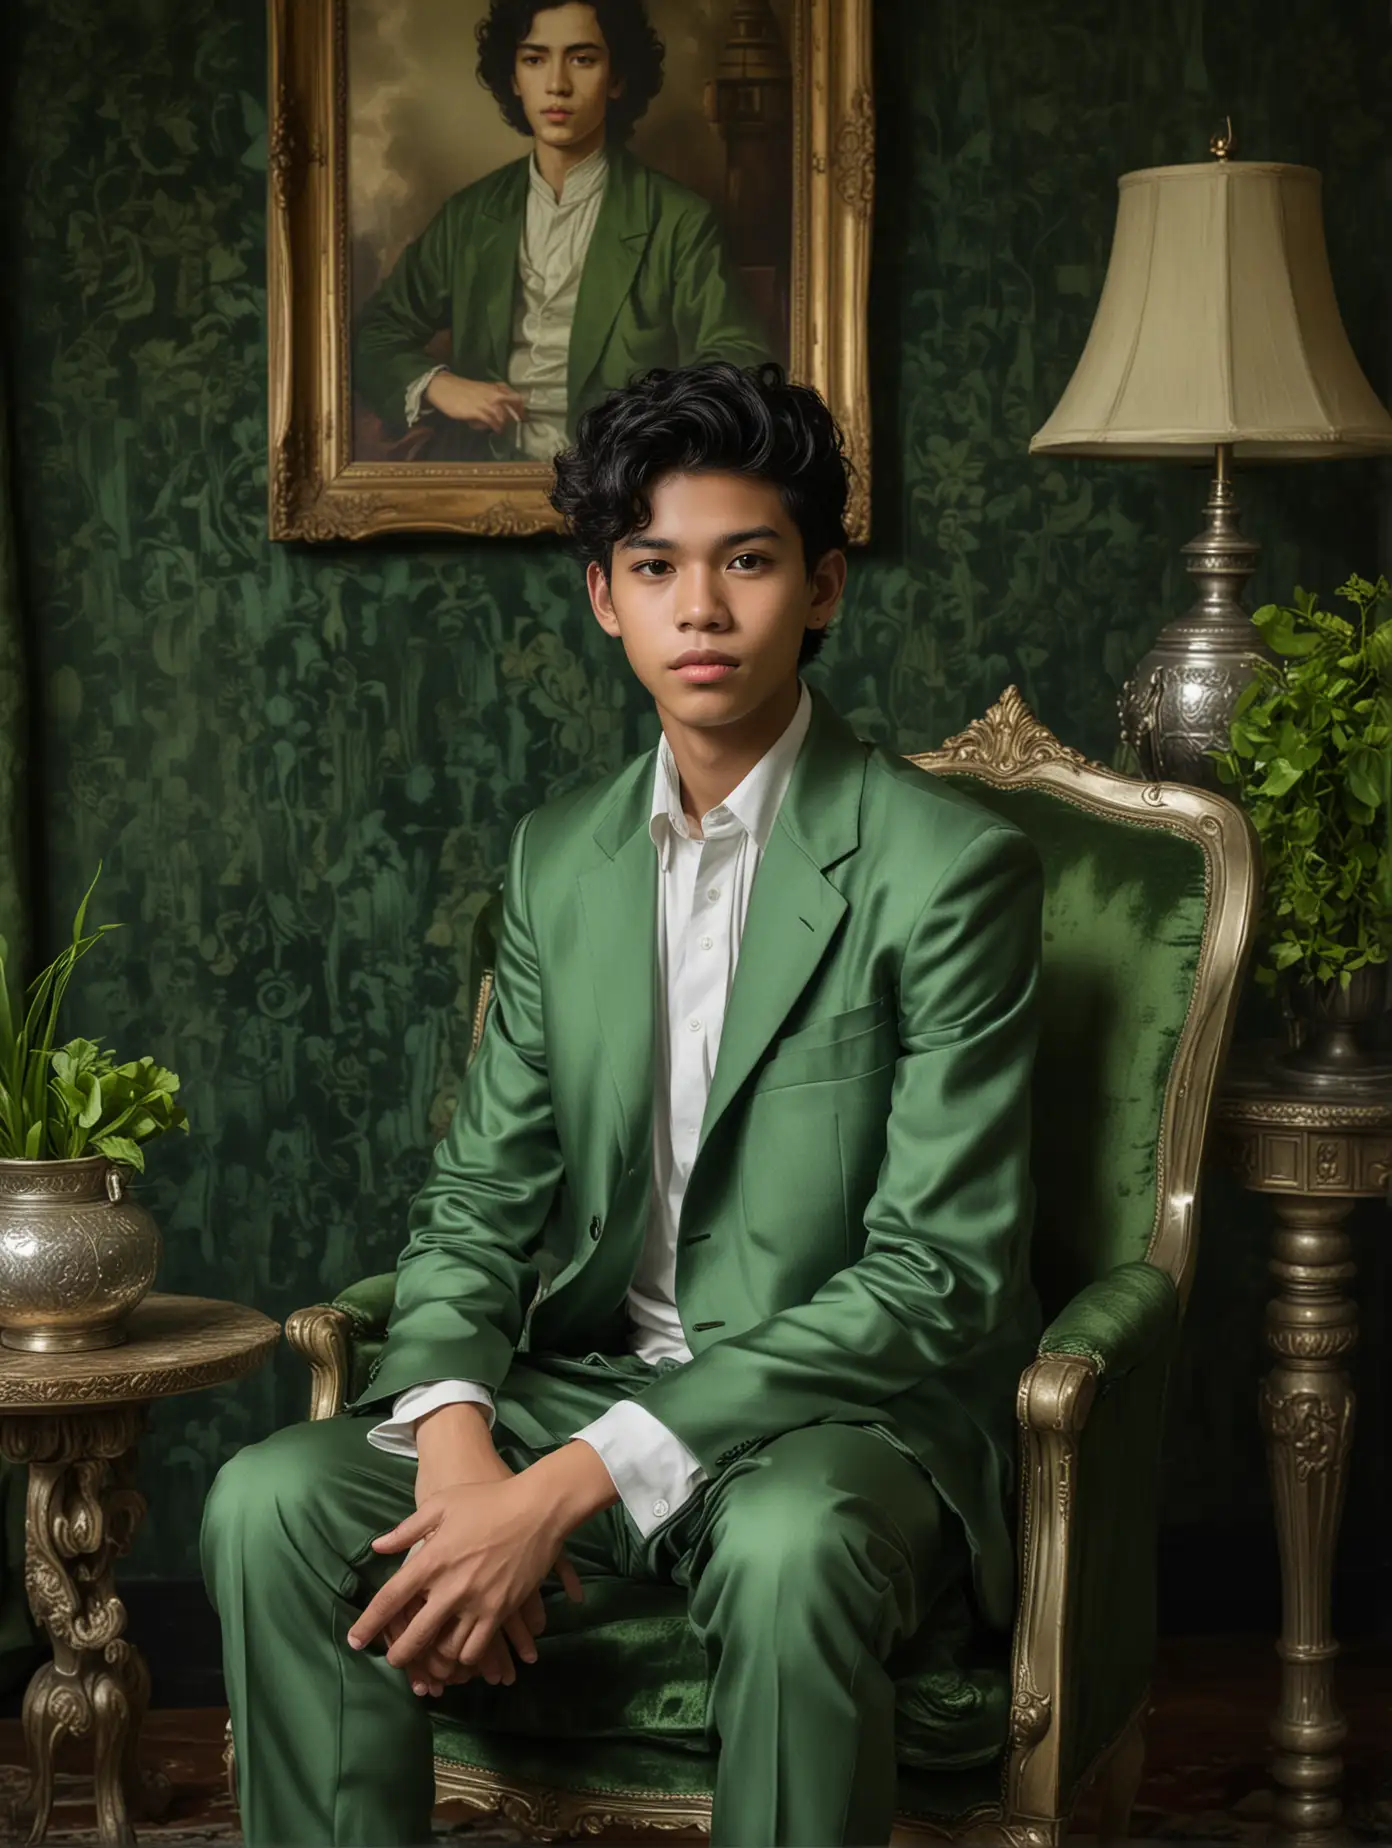 a 16 year old Indonesian man with white skin, wavy black hair, very handsome. wearing a green jacket and trousers, expression sly, sitting on a green velvet chair in a spacious room with silver and green decorations, paintings, lamps, and carpets.